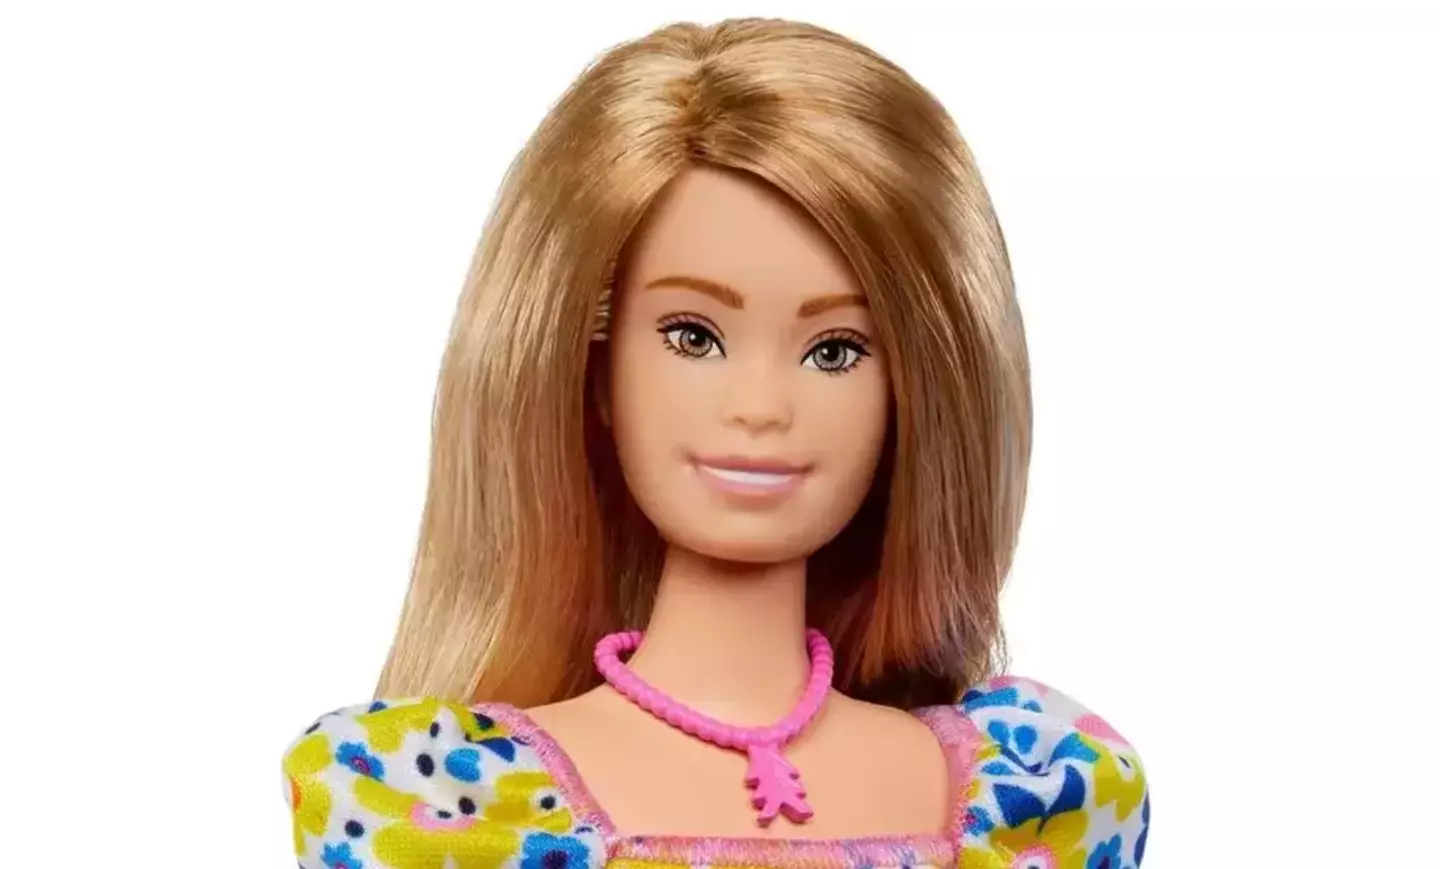 Mattel have created a Barbie doll with Down's syndrome.